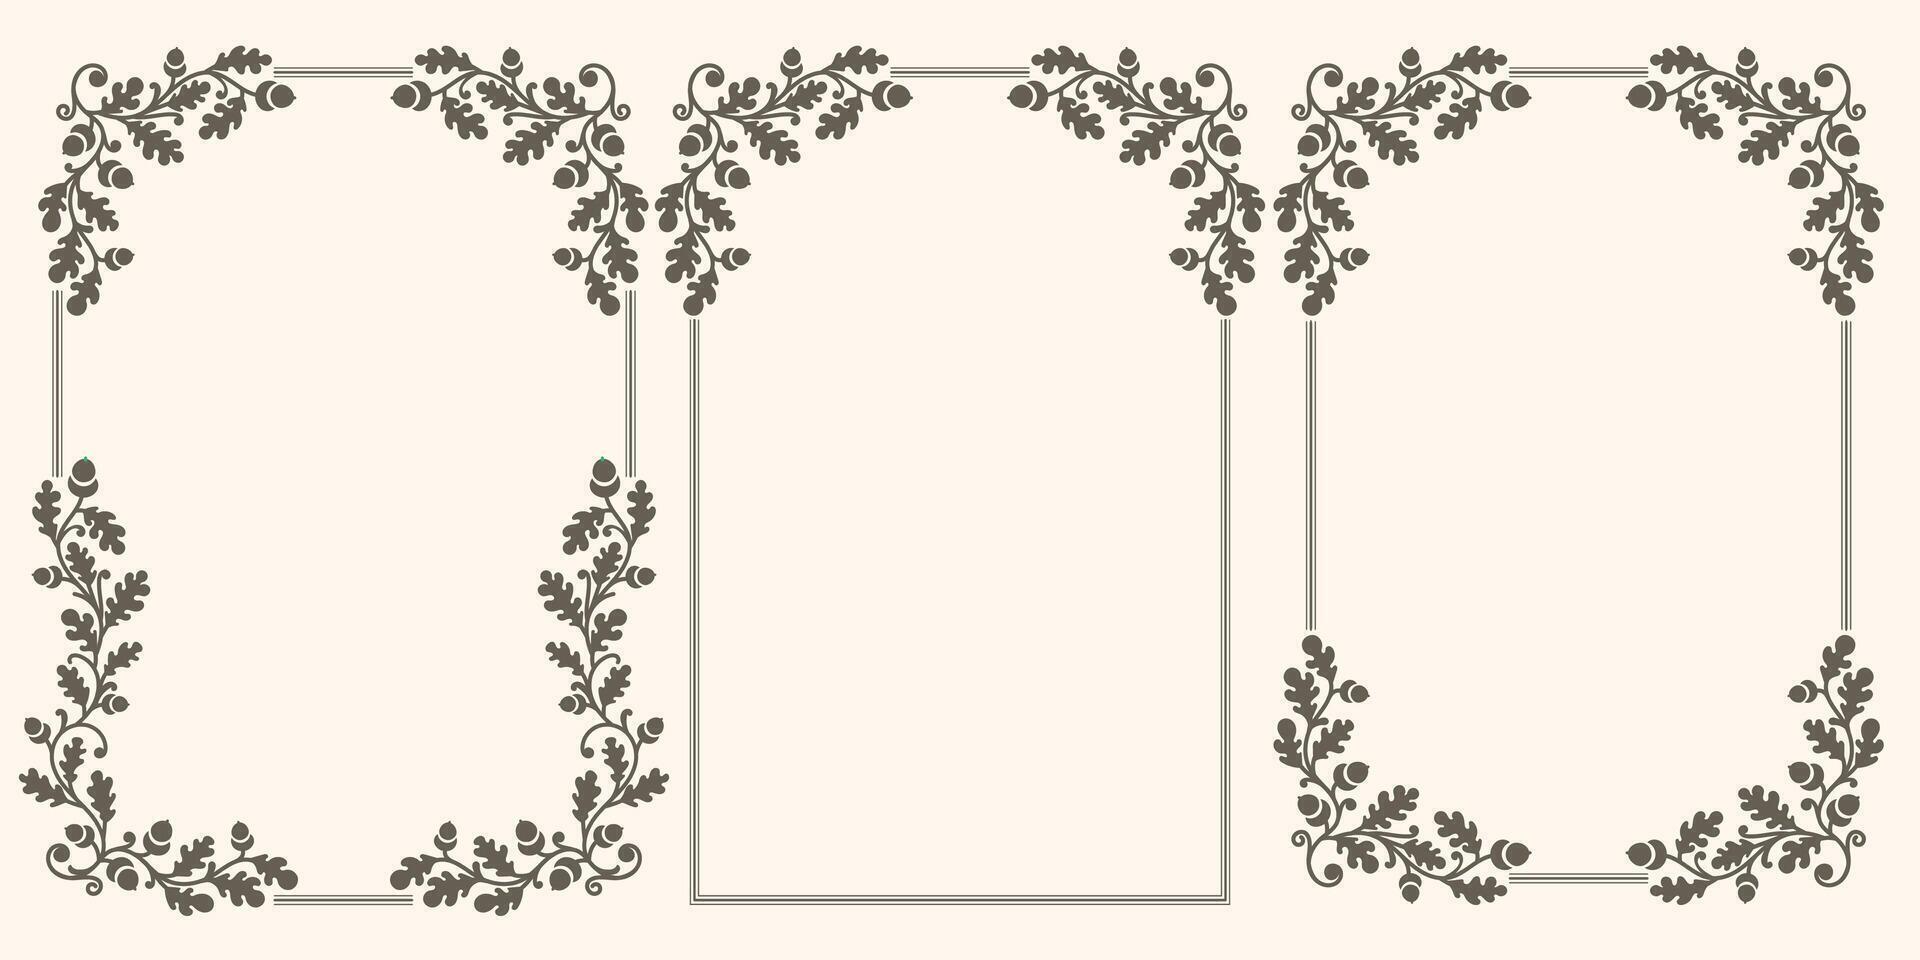 Set of vector frames with oak branches and acorns